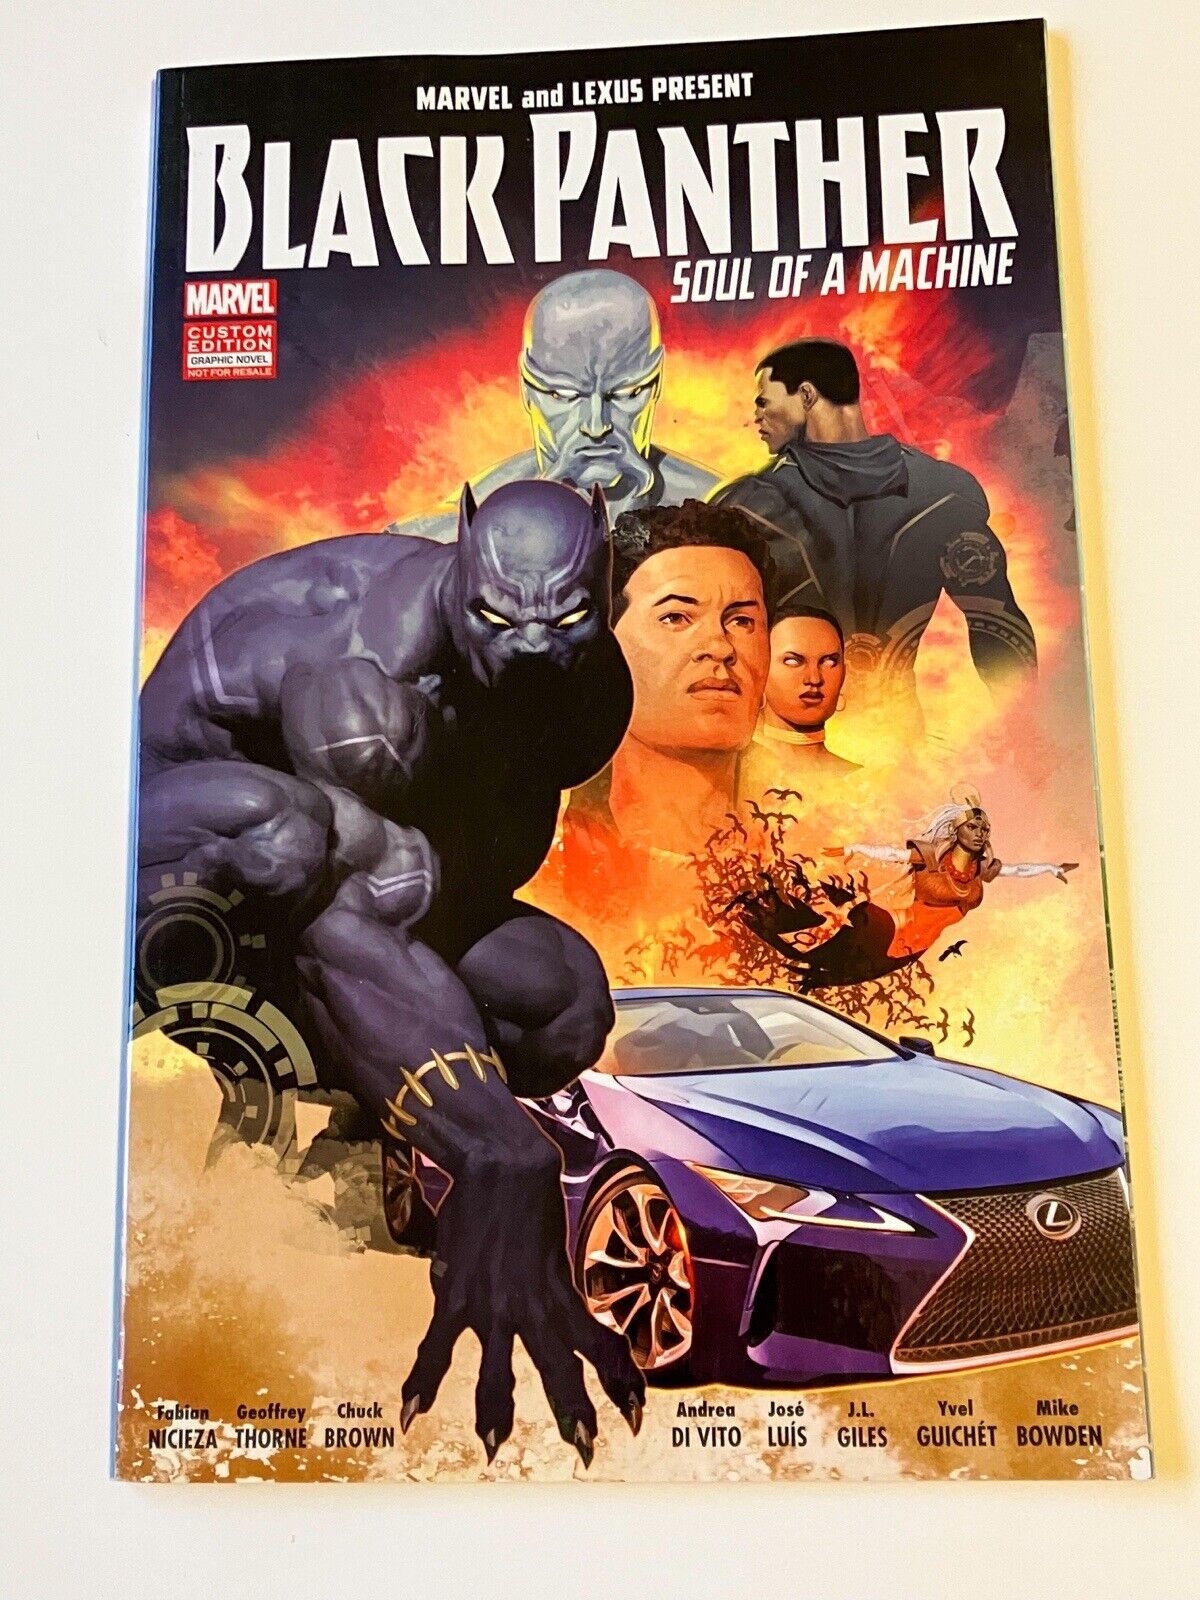 Black Panther Soul of a Machine, Lexus LC Comic Custom Edition 2018 RARE 1 Issue